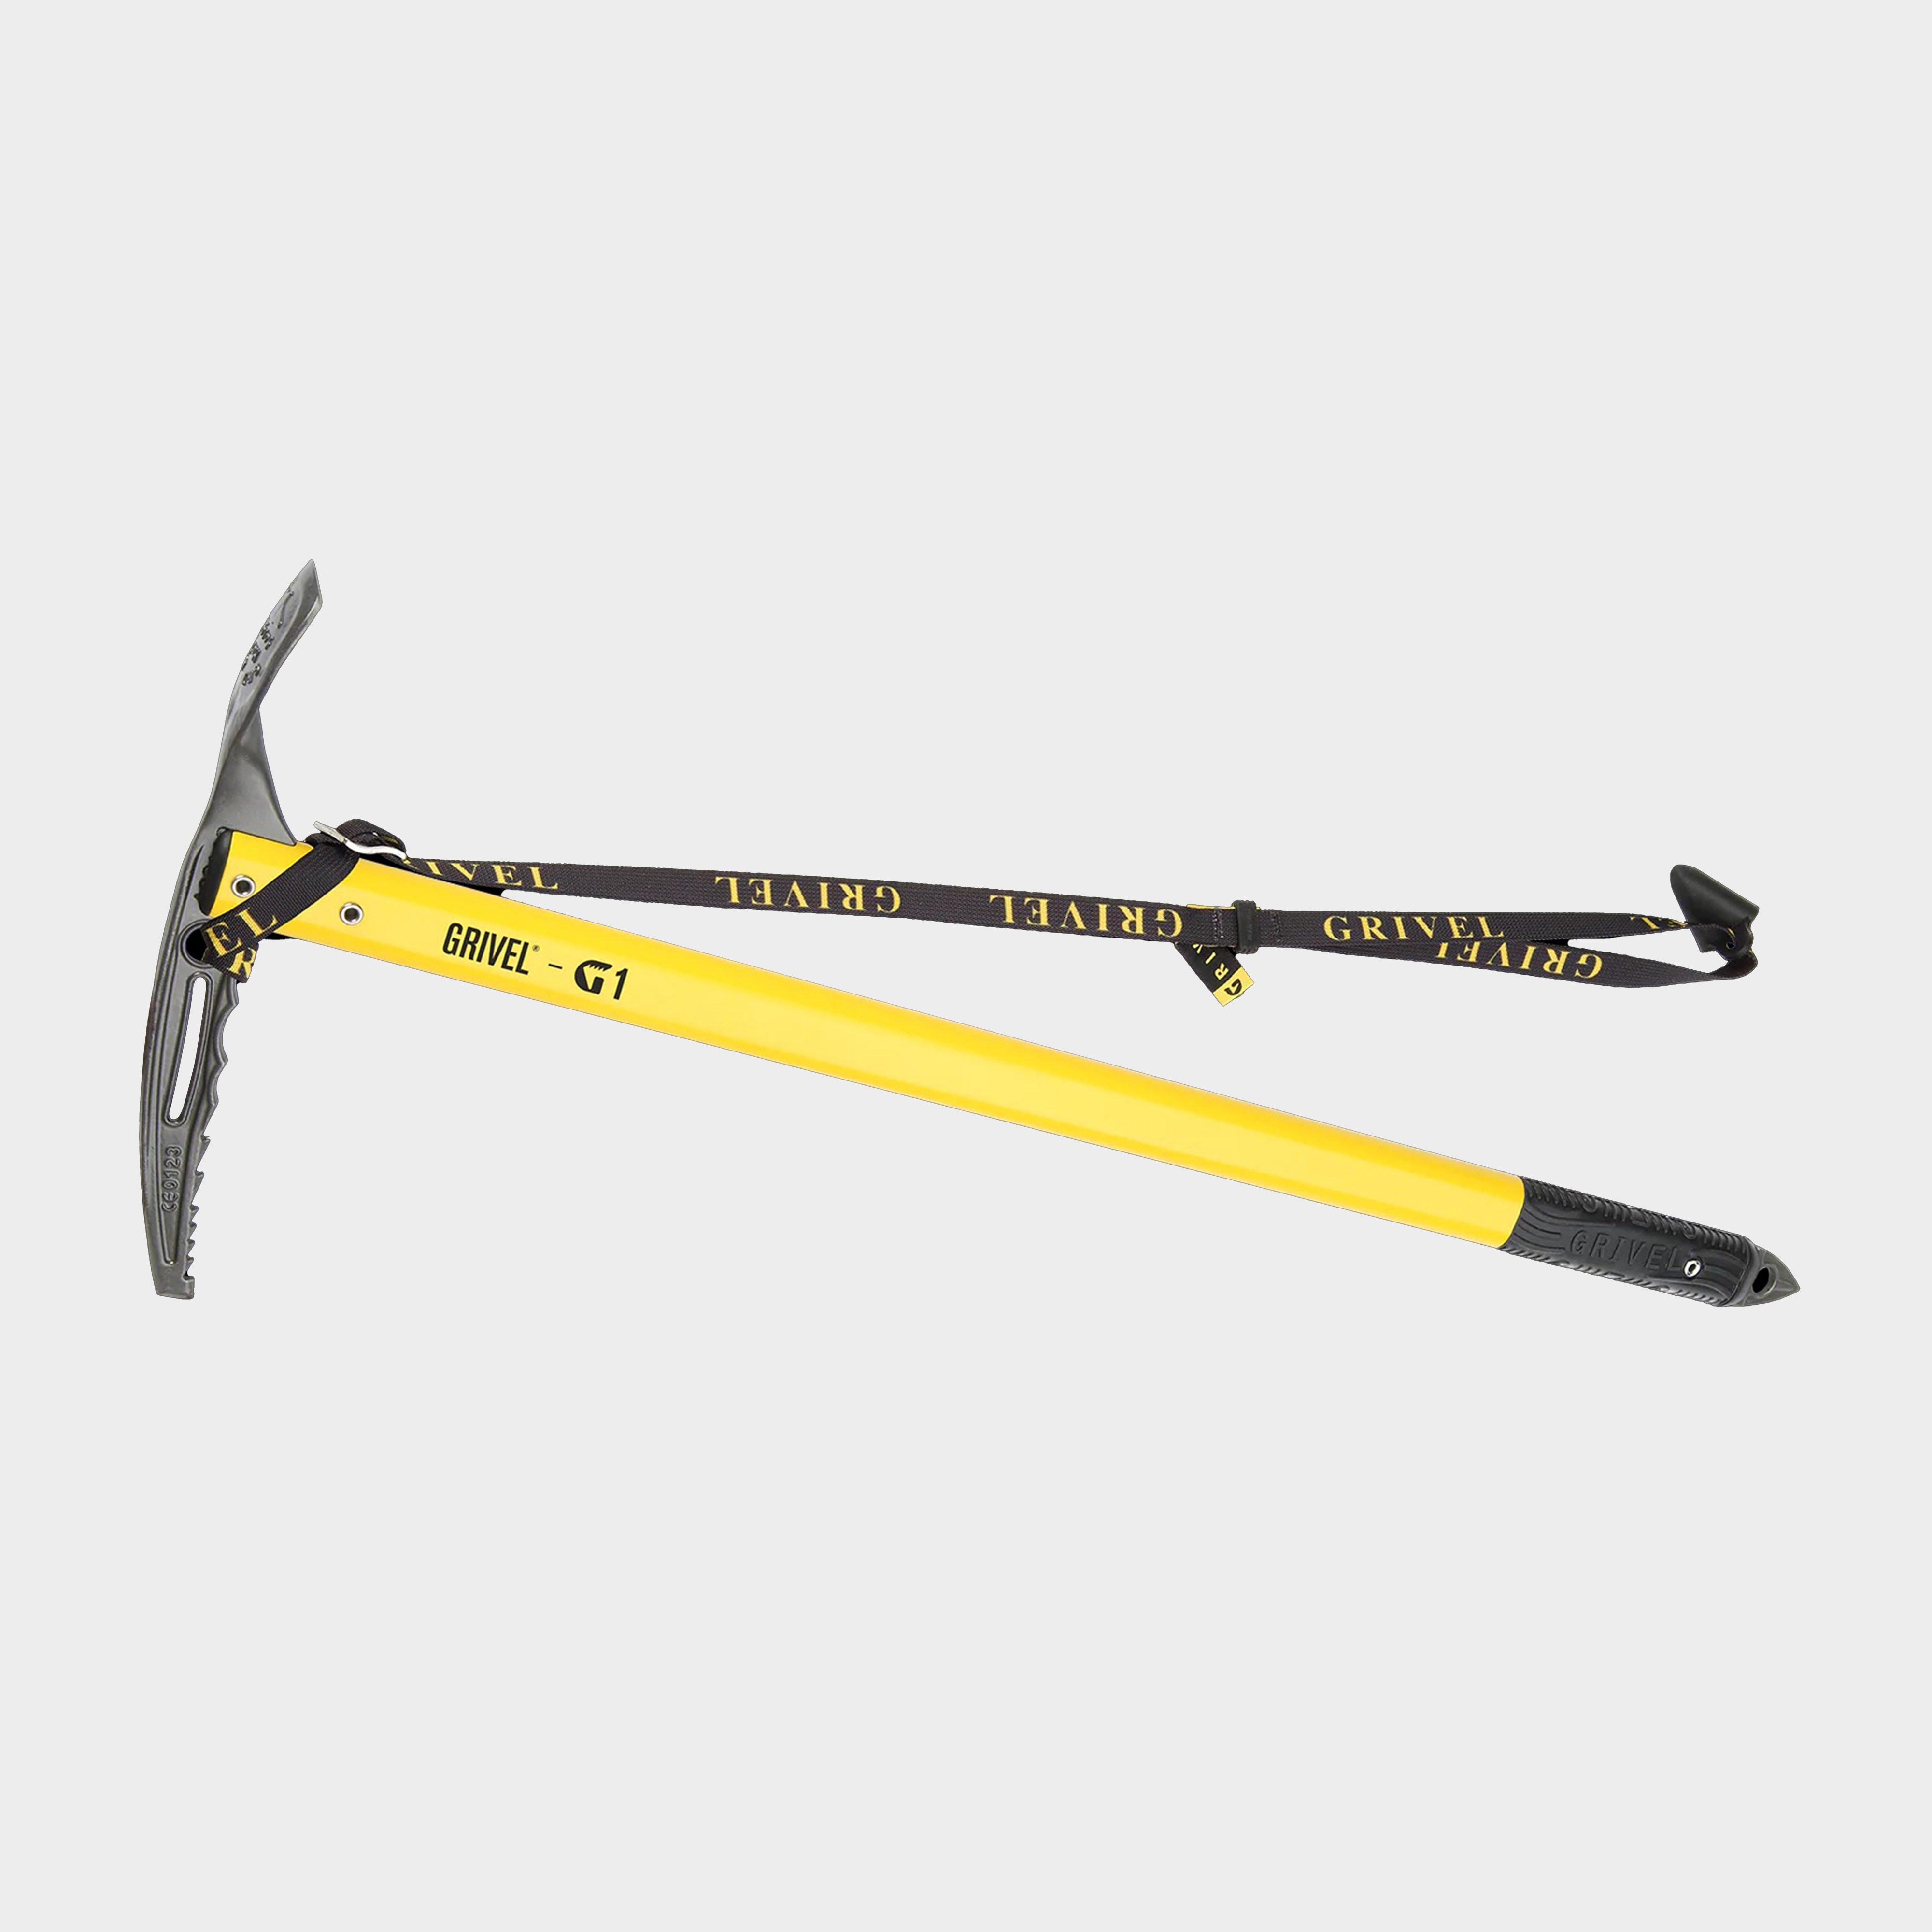  Grivel G1+ Ice Axe and Single Spring Leash and Rotor Krab, Yellow